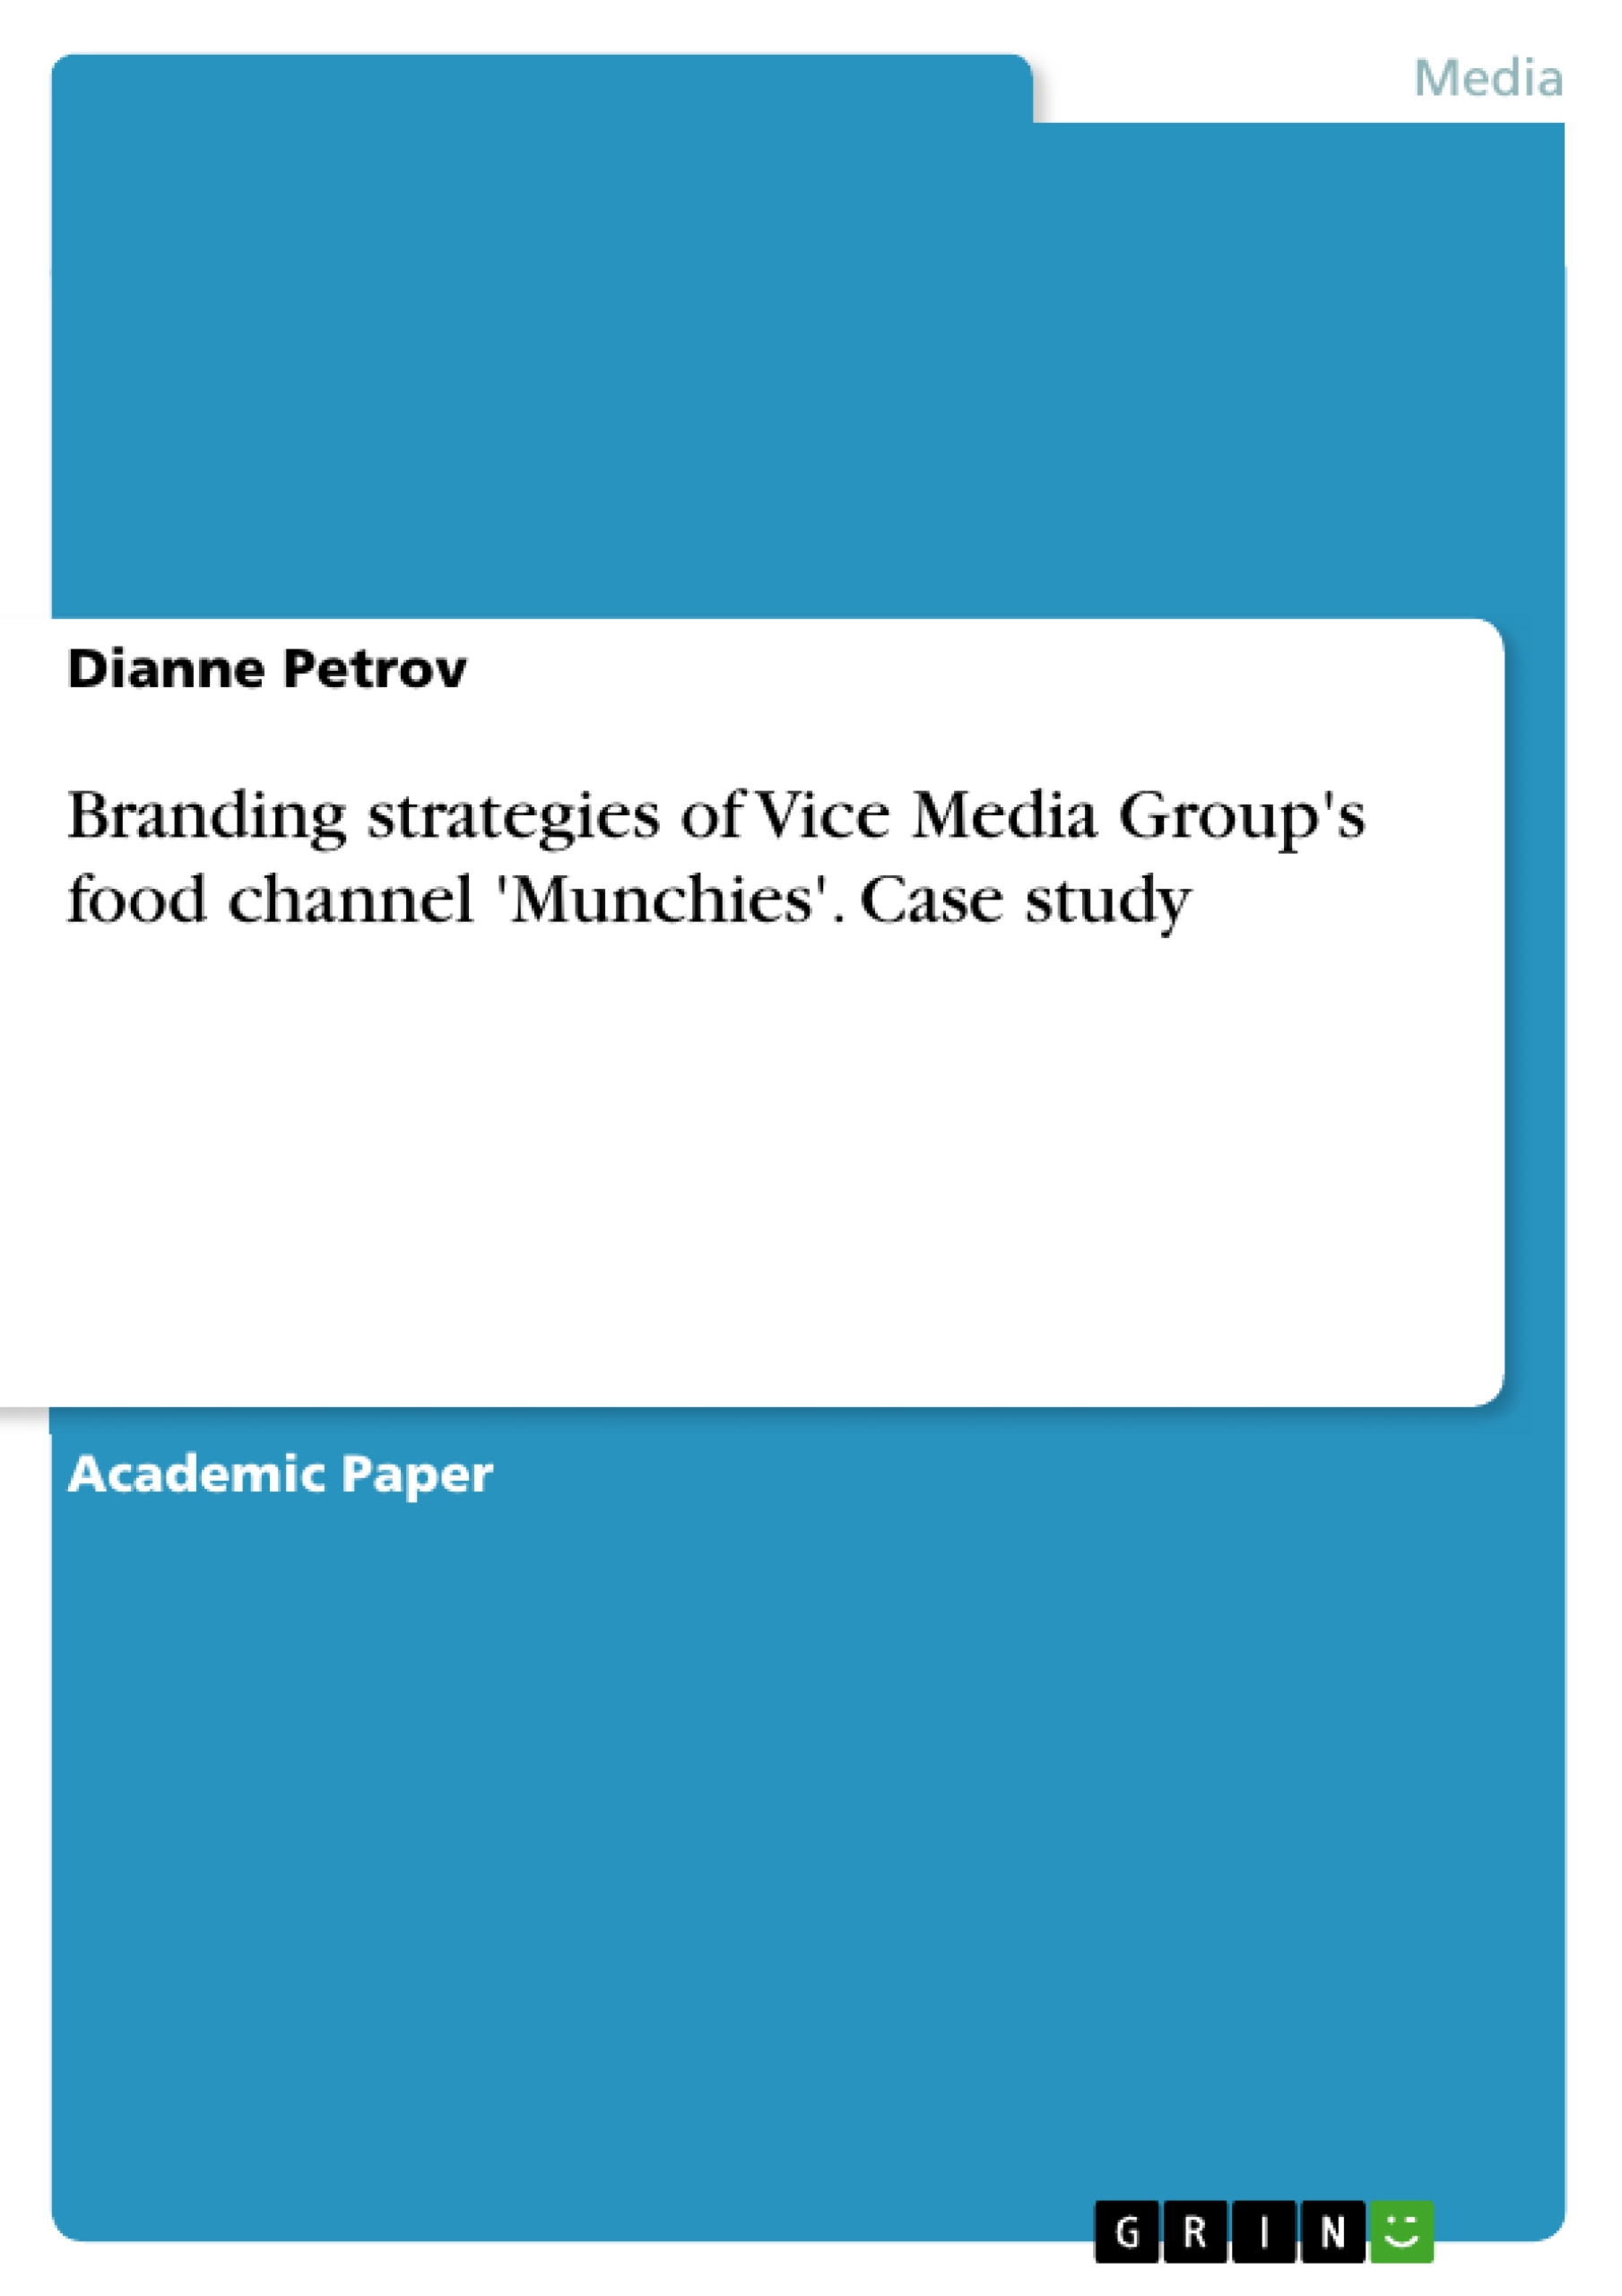 Branding strategies of Vice Media Group's food channel 'Munchies'. Case study